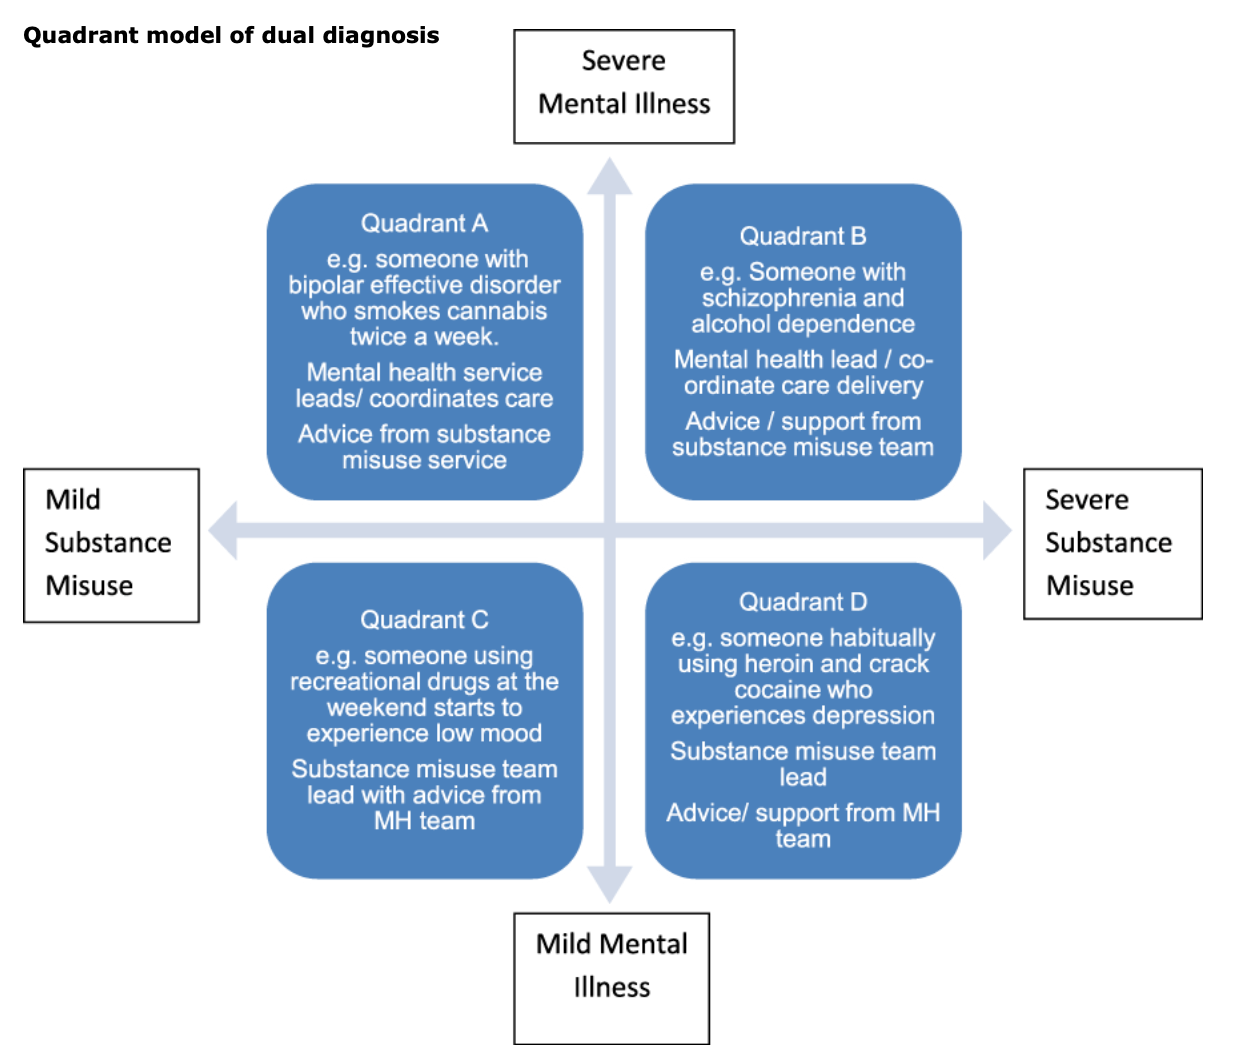 Quadrant model of dual diagnosis based on South Staffordshire and Shropshire Healthcare’s dual diagnosis policy